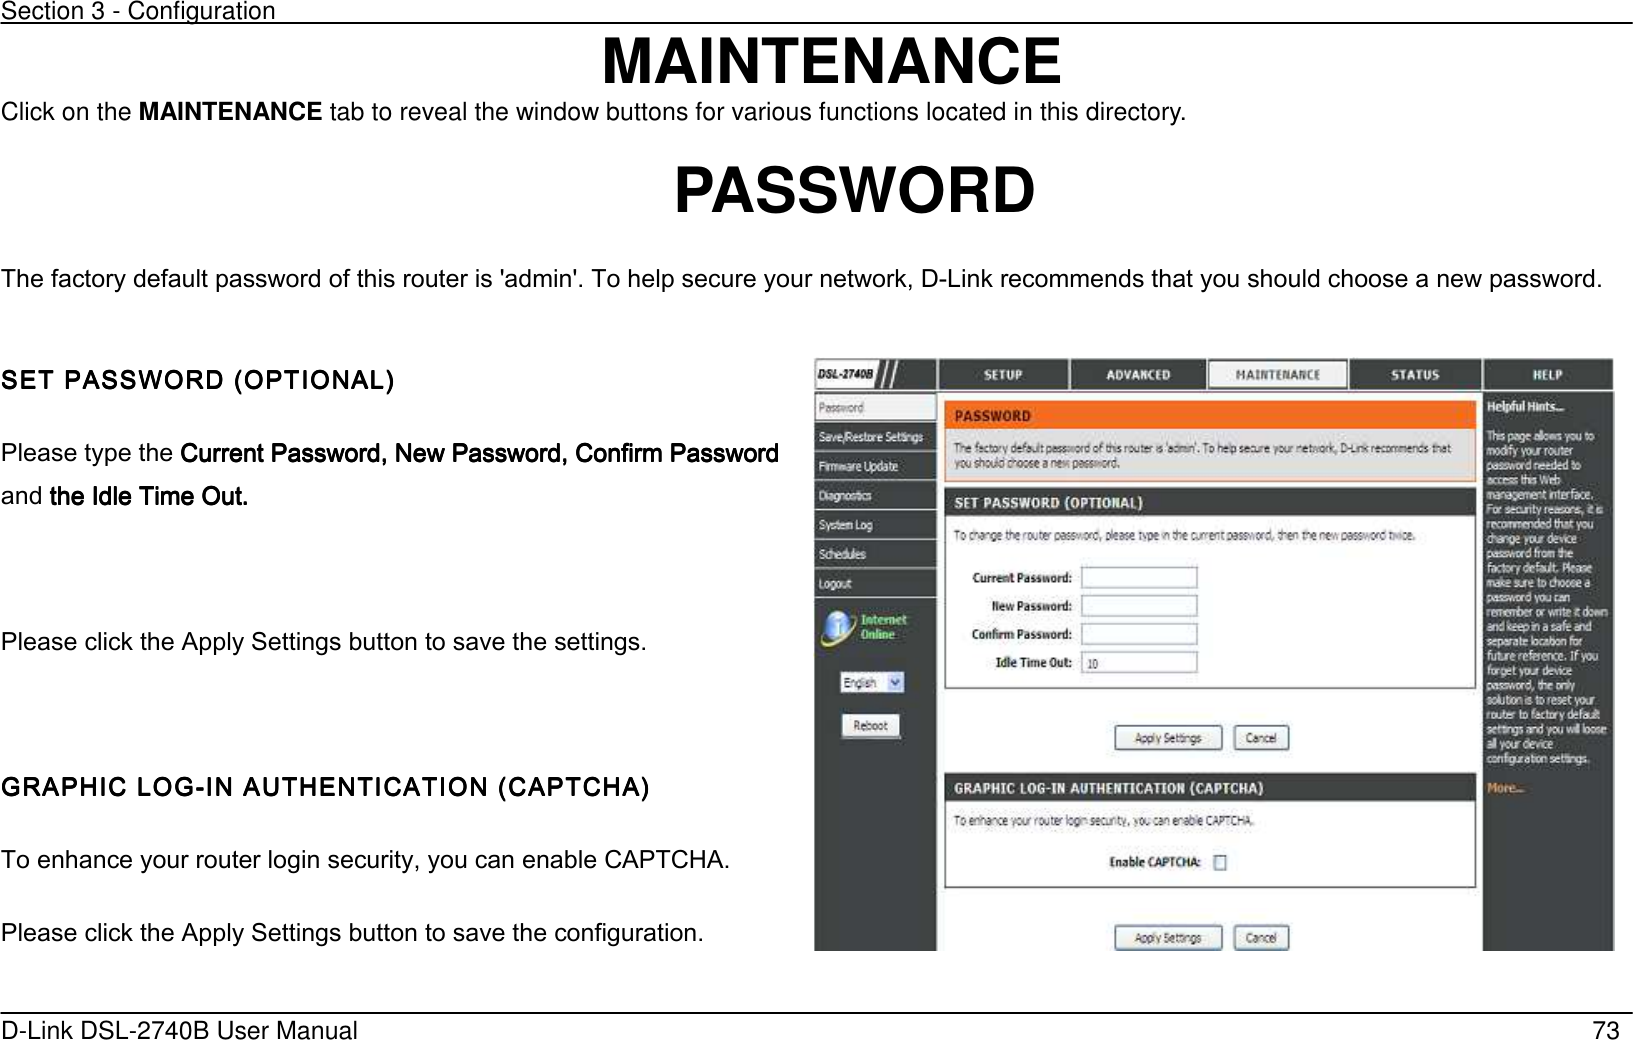 Section 3 - Configuration   D-Link DSL-2740B User Manual                                                  73 MAINTENANCE Click on the MAINTENANCE tab to reveal the window buttons for various functions located in this directory.  PASSWORD The factory default password of this router is &apos;admin&apos;. To help secure your network, D-Link recommends that you should choose a new password.  SET PASSWORD (OPTIONSET PASSWORD (OPTIONSET PASSWORD (OPTIONSET PASSWORD (OPTIONAL’AL’AL’AL’    Please type the Current Password, New Password, Confirm Password Current Password, New Password, Confirm Password Current Password, New Password, Confirm Password Current Password, New Password, Confirm Password and    the Idle Time Out.the Idle Time Out.the Idle Time Out.the Idle Time Out.        Please click the Apply Settings button to save the settings.  GRAPHIC LOGGRAPHIC LOGGRAPHIC LOGGRAPHIC LOG----IN AUTHENTICATION (CIN AUTHENTICATION (CIN AUTHENTICATION (CIN AUTHENTICATION (CAPTCHA’APTCHA’APTCHA’APTCHA’    To enhance your router login security, you can enable CAPTCHA. Please click the Apply Settings button to save the configuration.    